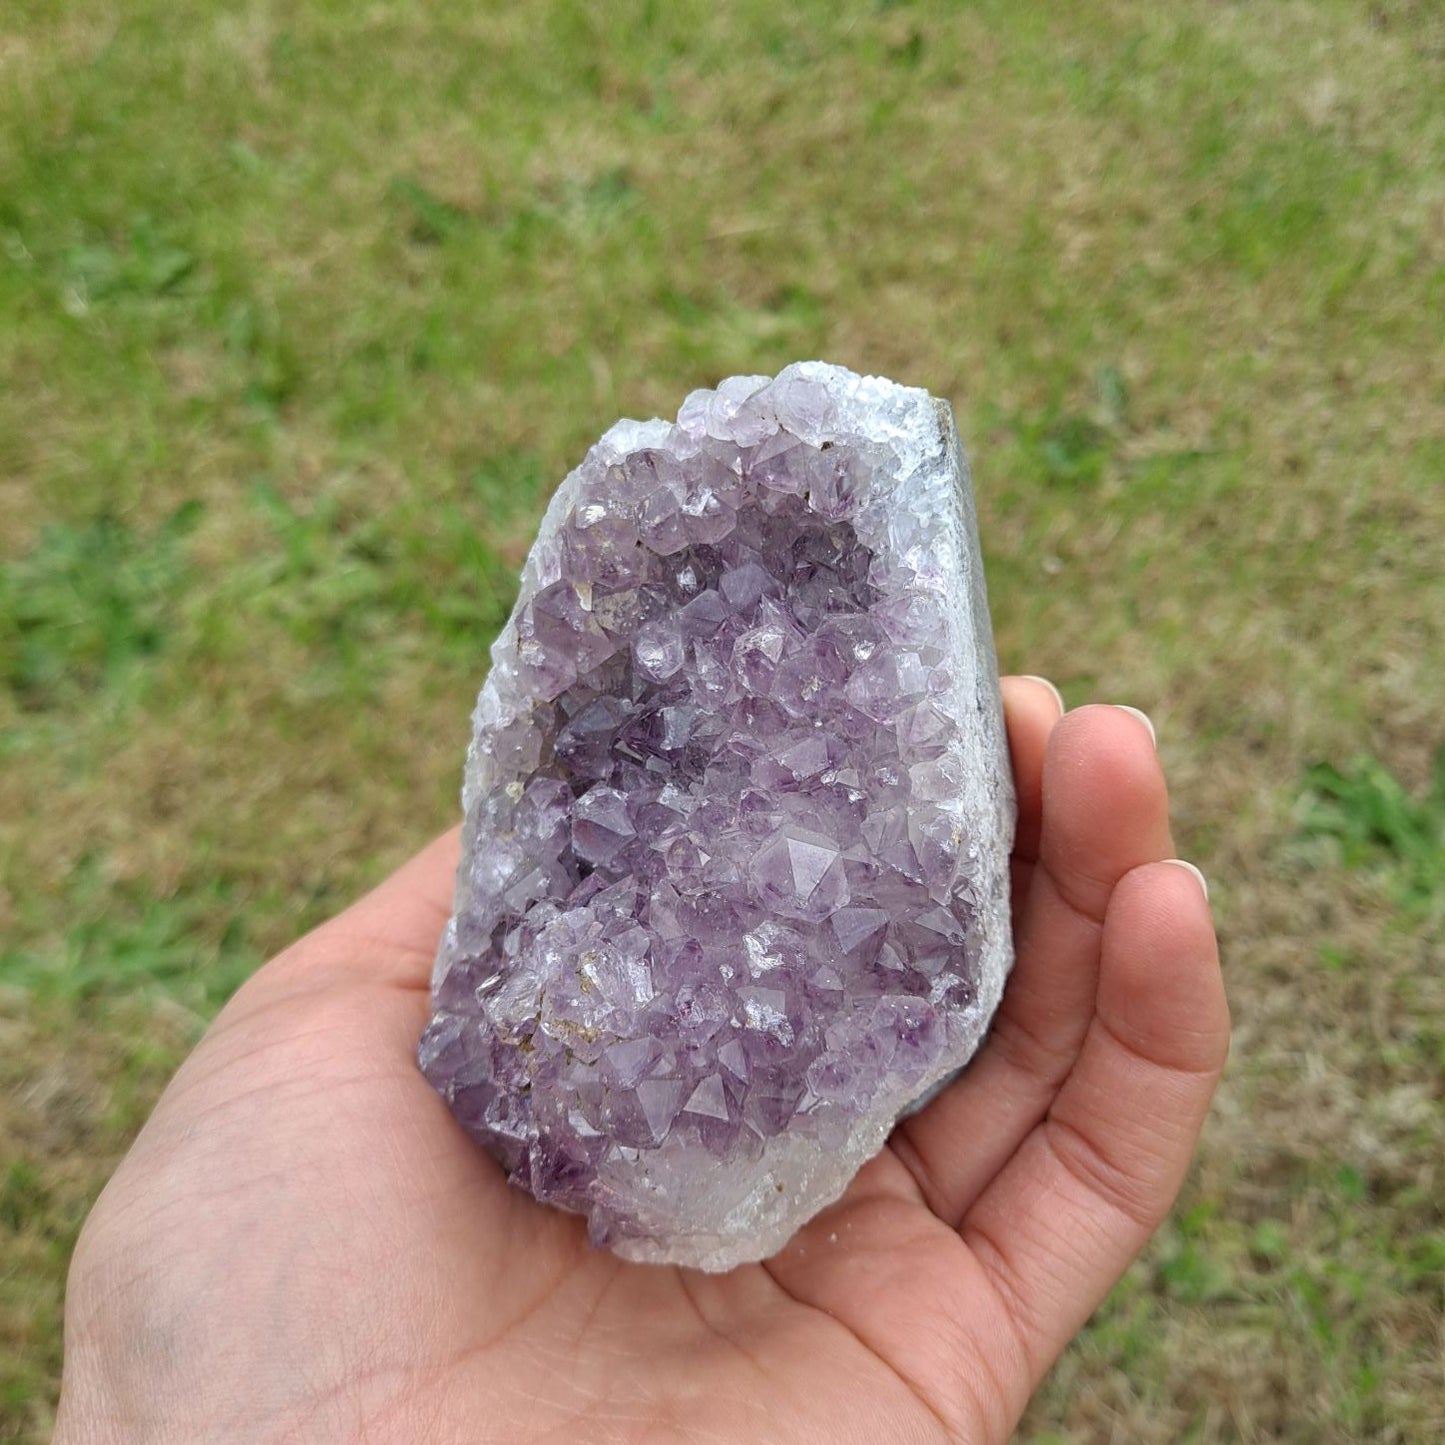 Dumi's Crystals | Lavender Amethyst Cluster (8.9 x 6.3 x 6.3cm) | Holding a Lavender Amethyst Cluster (8.9 x 6.3 x 6.3cm) in your hand. Let its gentle energy wash over you, promoting relaxation, inner peace, and spiritual connection.